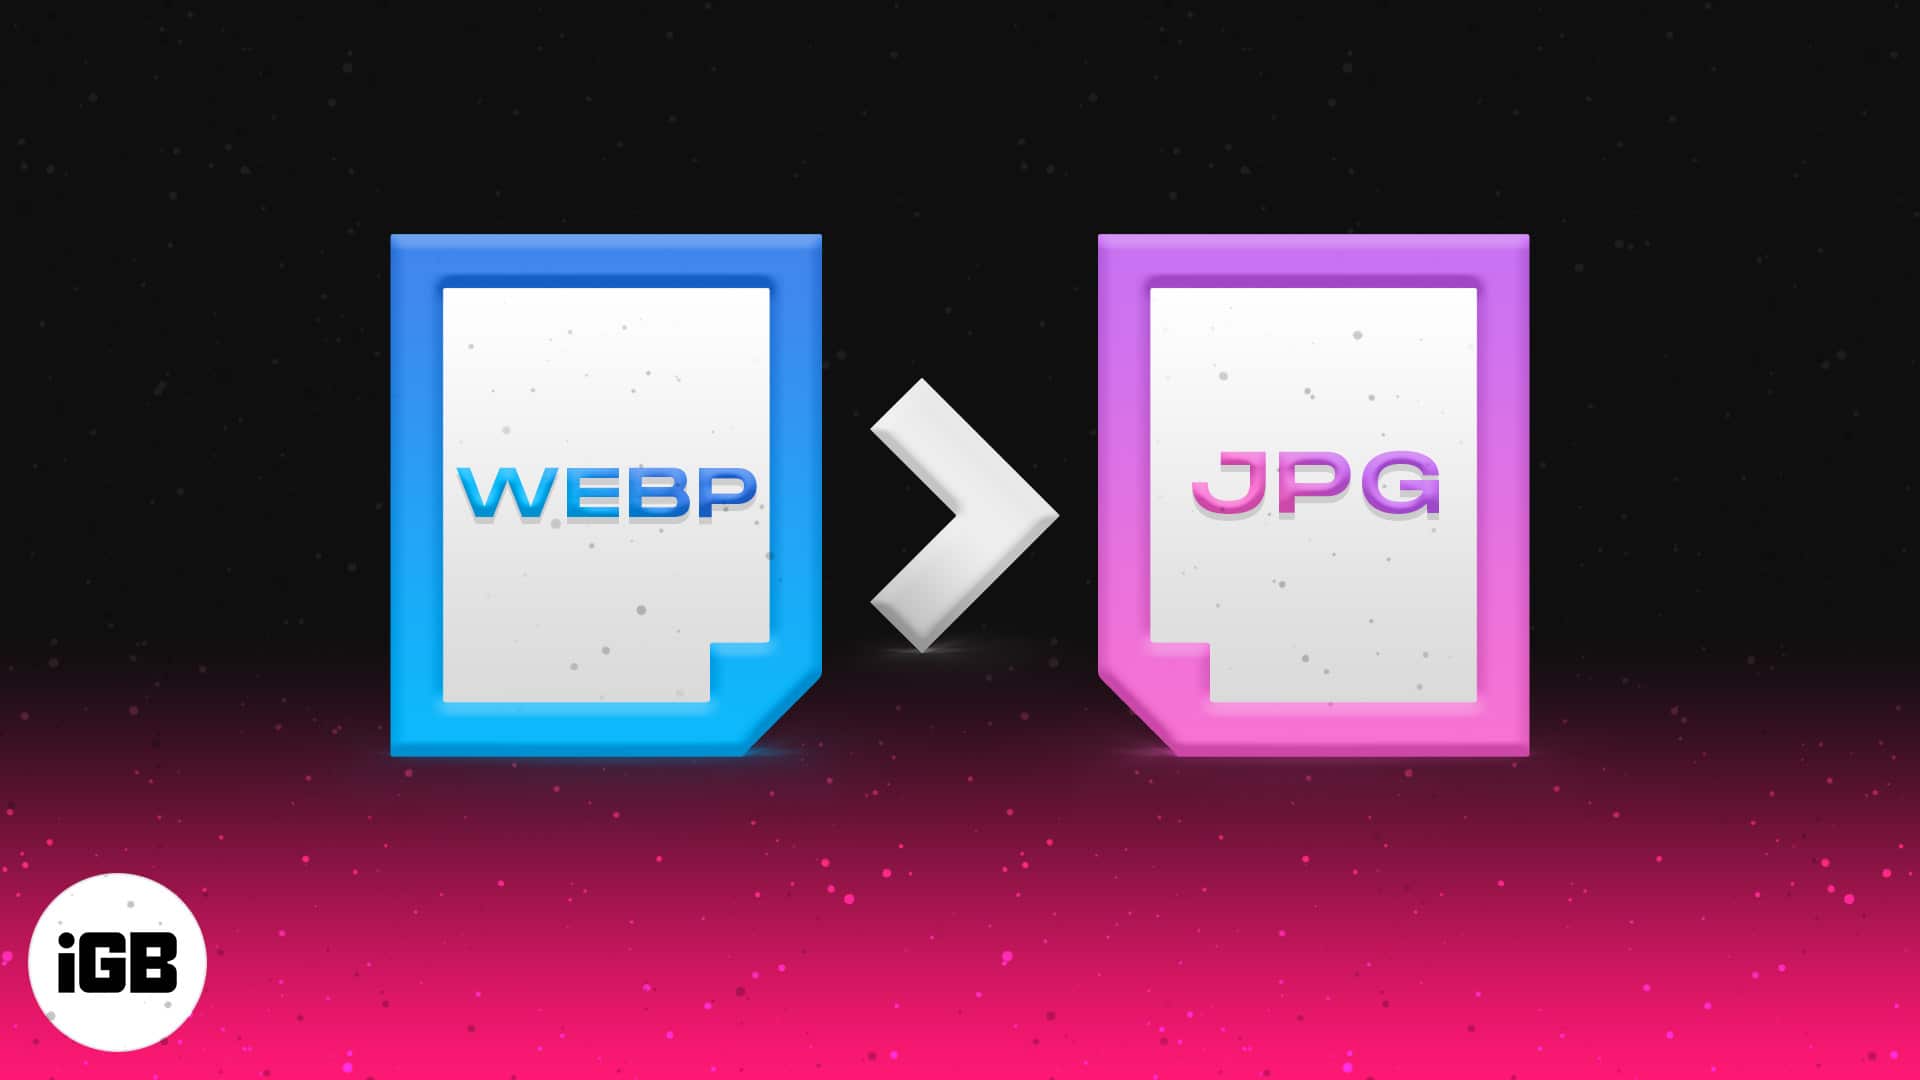 convert webp to gif for iphone